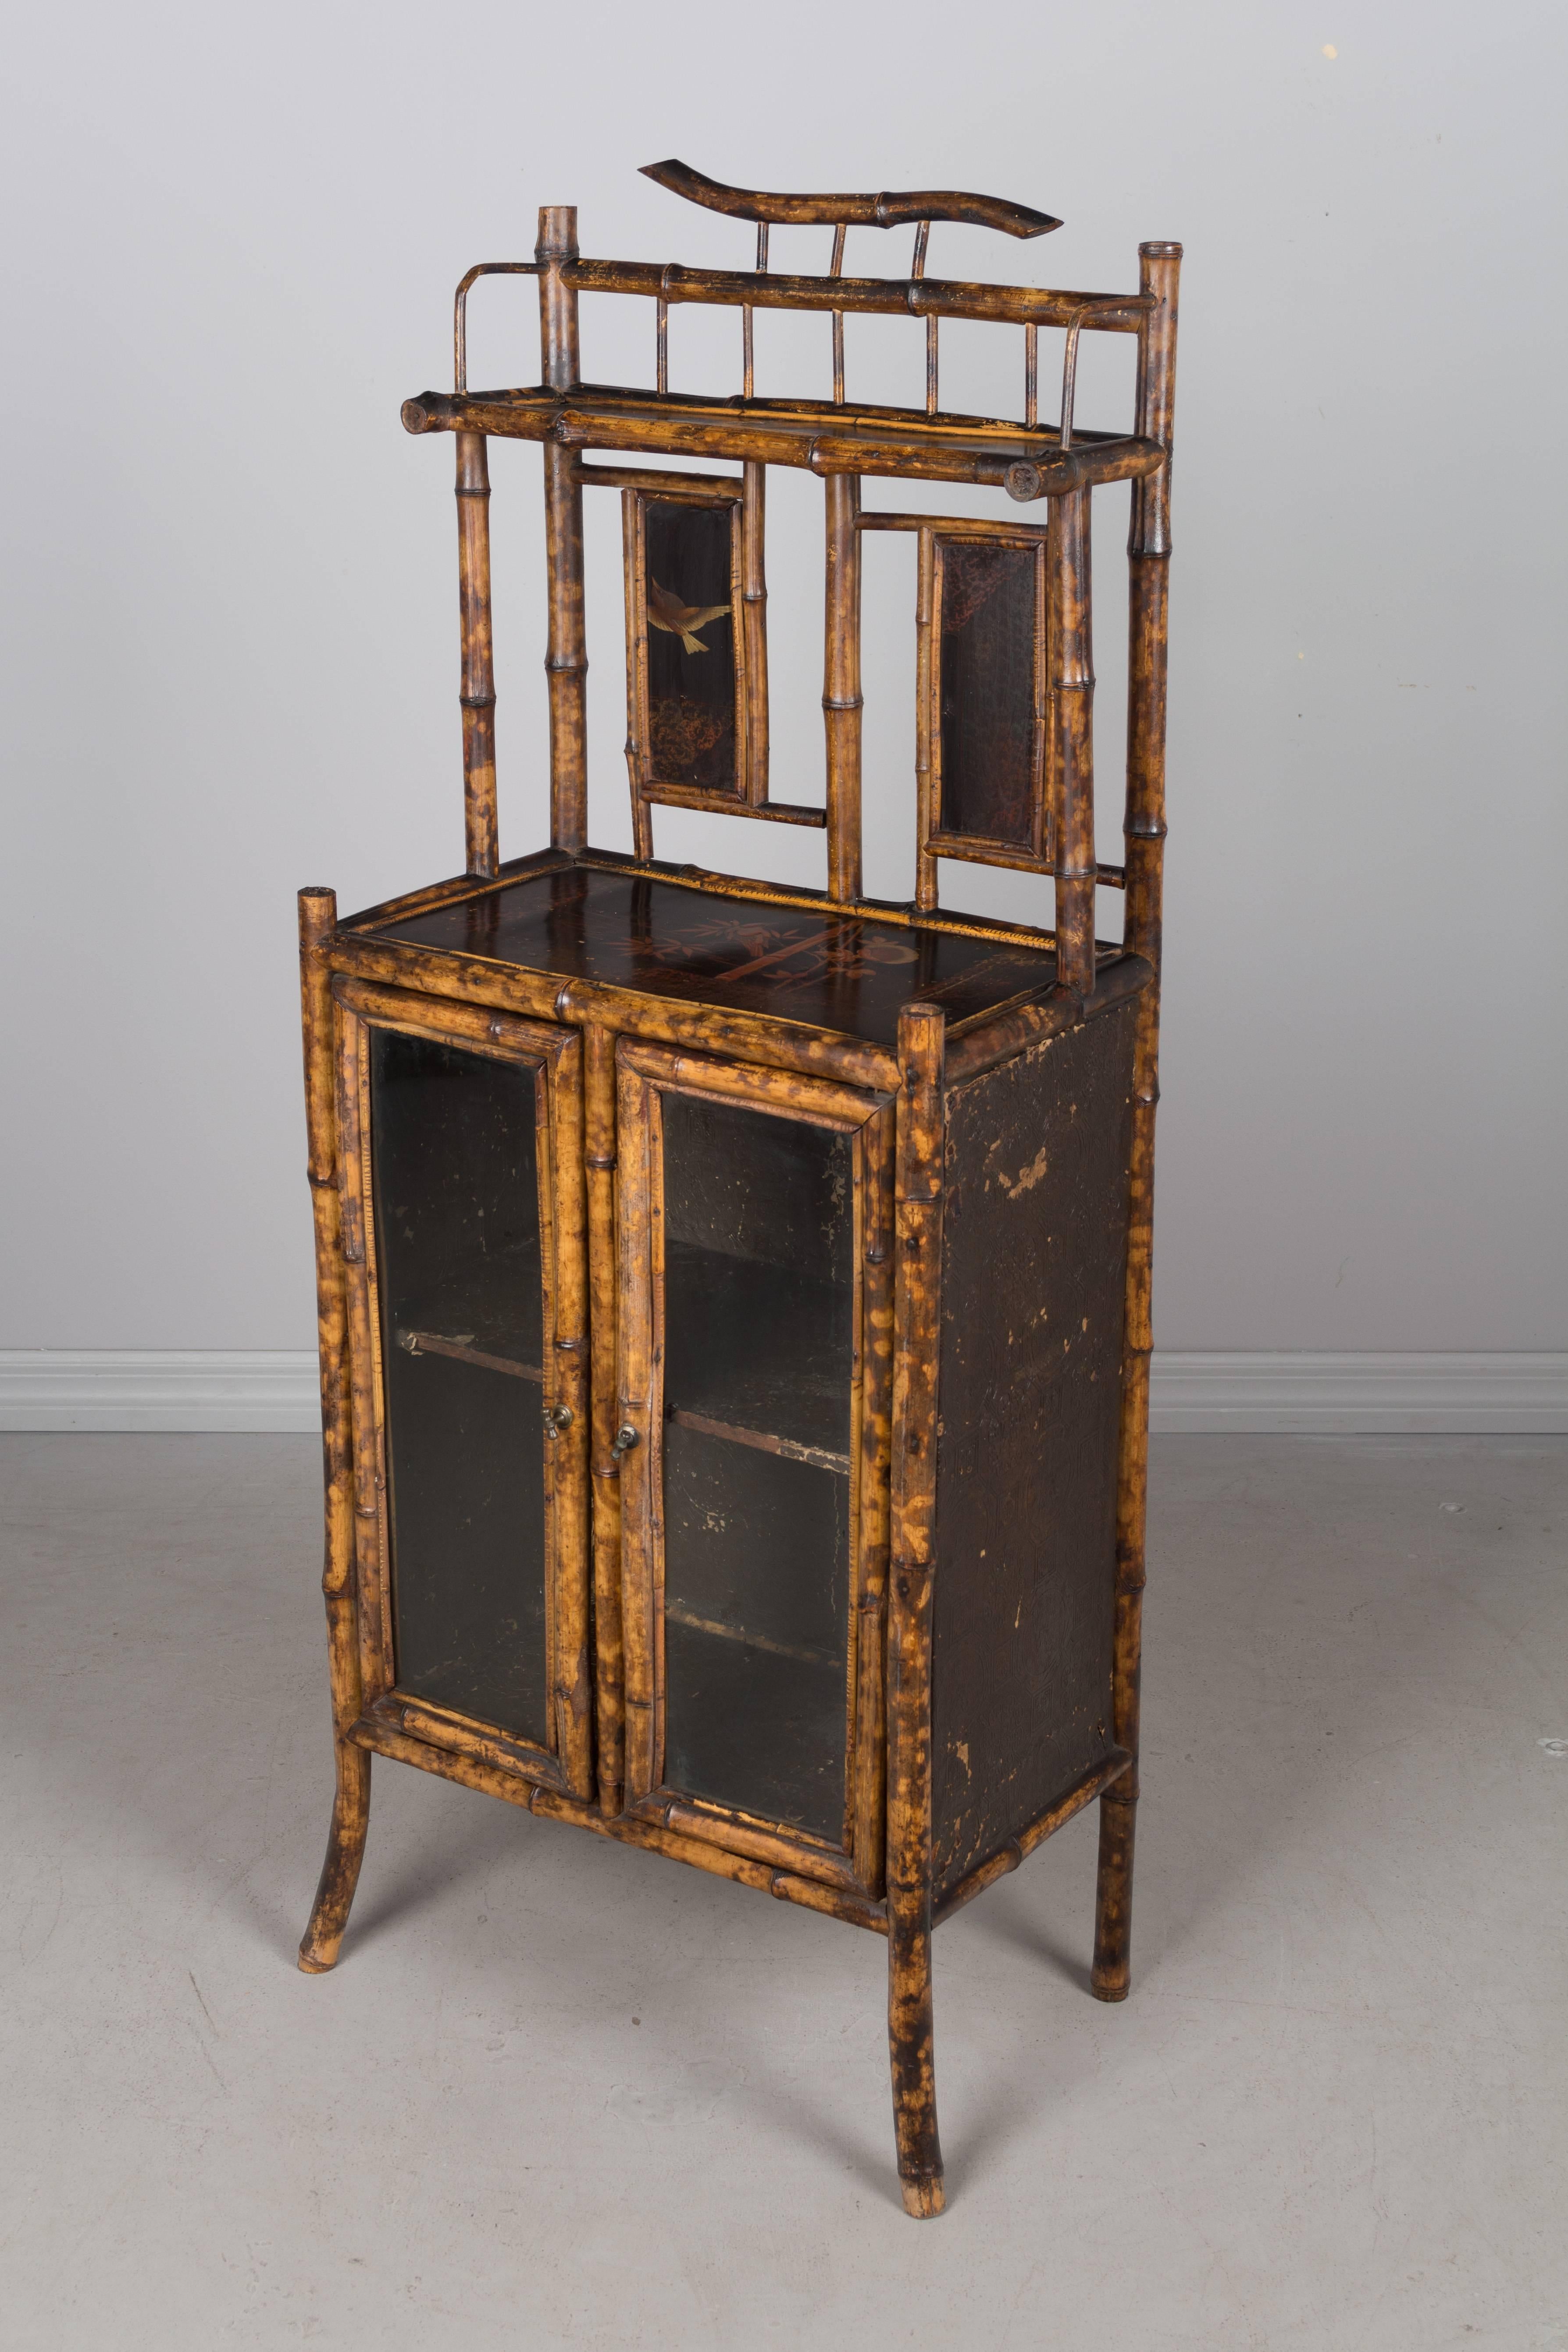 19th century English bamboo cabinet with decorative chinoiserie lacquer panels. Glass panelled doors open to one shelf. Heavy embossed paper on the sides and lining the interior. All original. Small damage to the lacquer panel of the upper